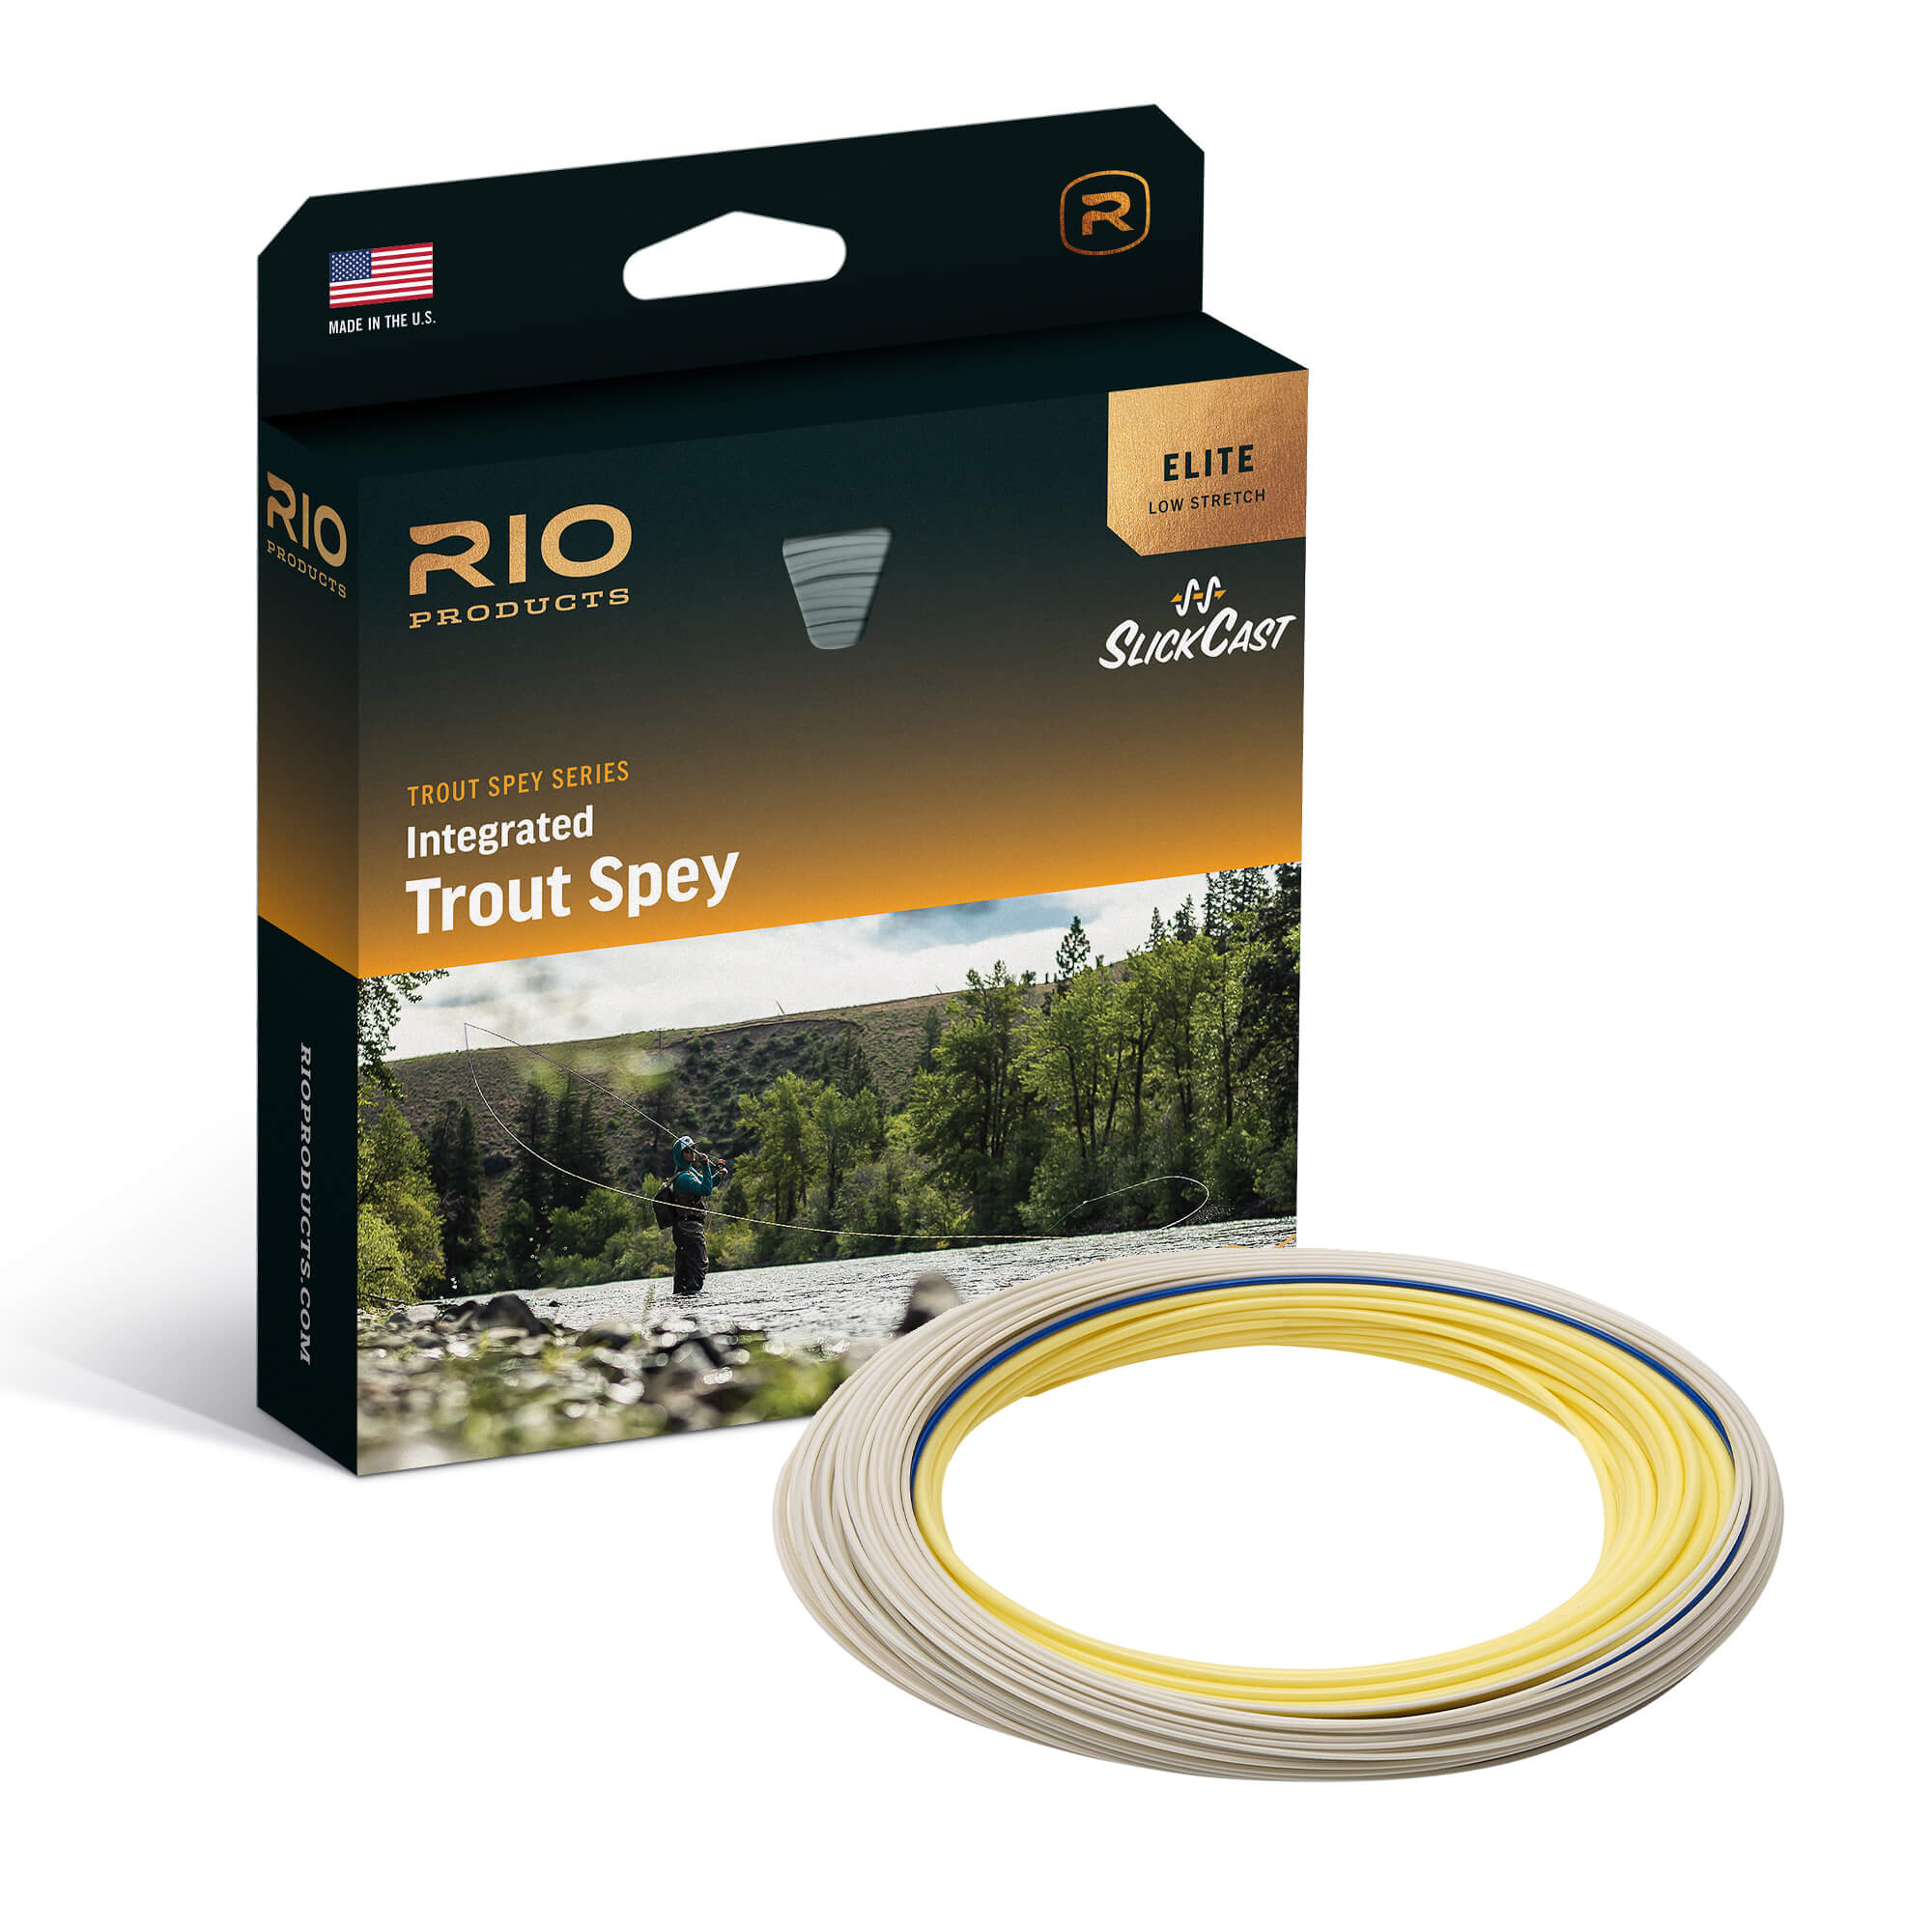 RIO ELITE INTEGRATED TROUT SPEY – Guide Flyfishing